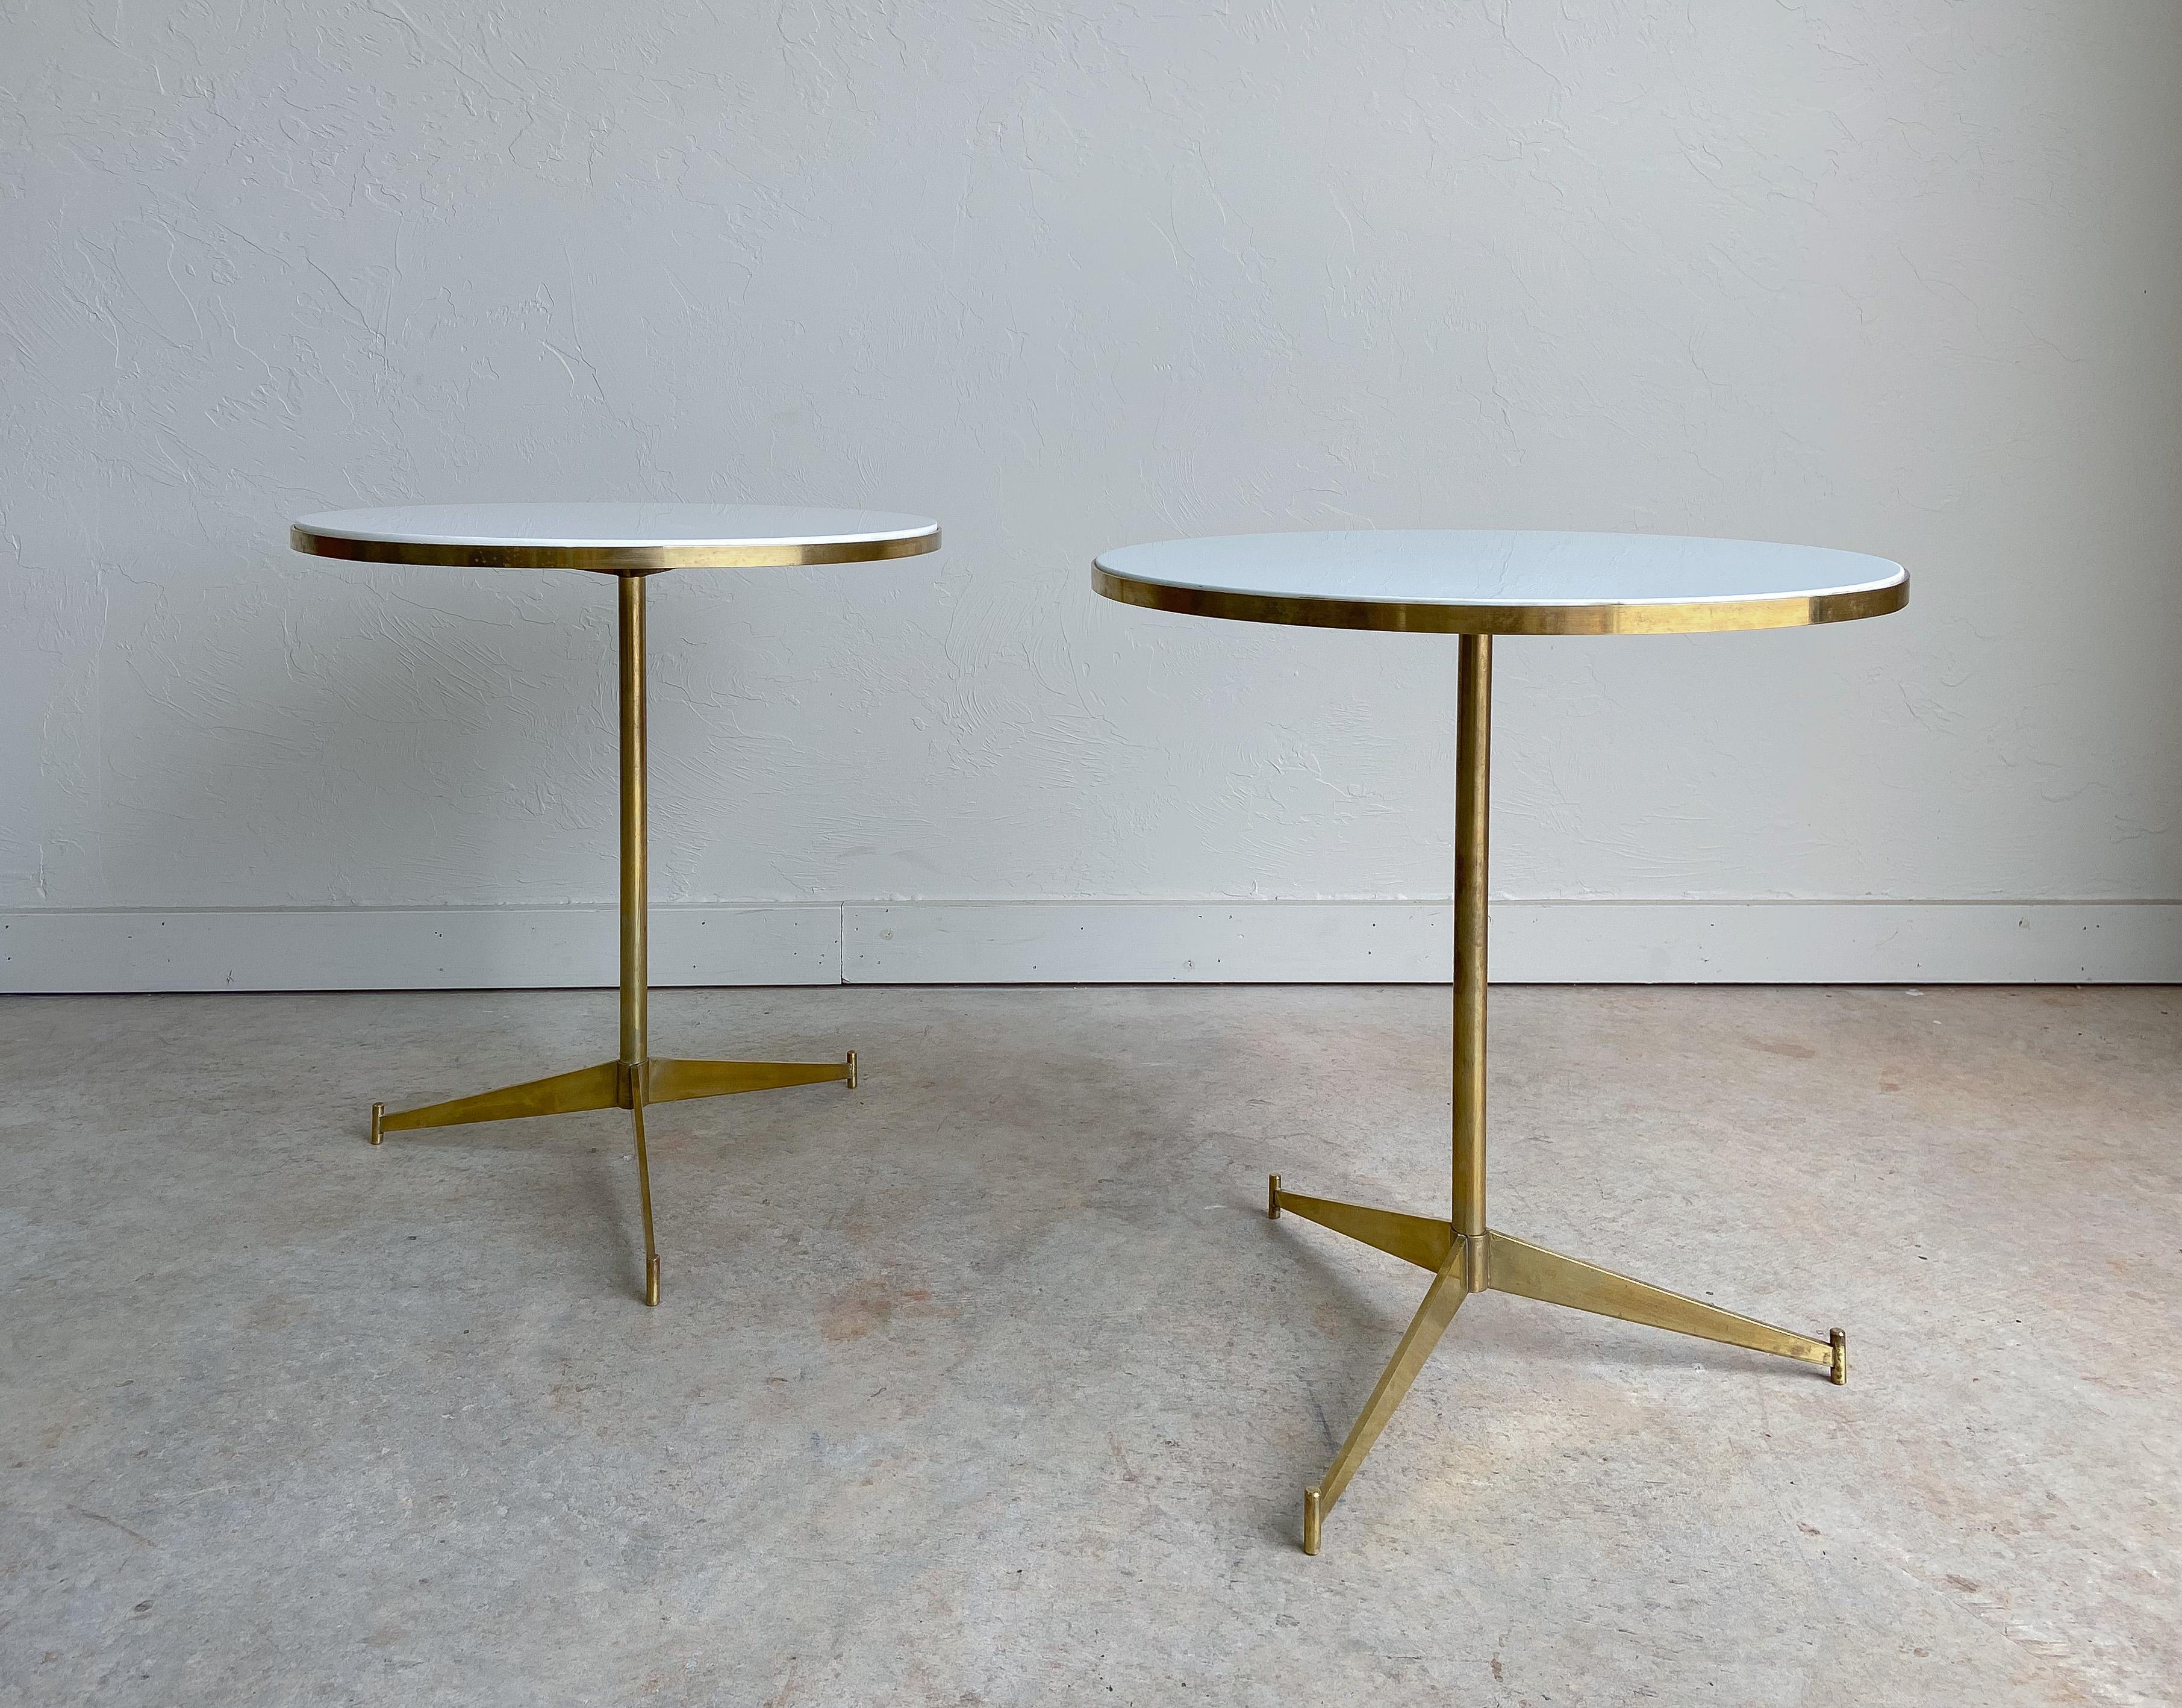 Offered is a rare design from Paul McCobb that doesn’t come to market often. Commonly referred to as the “cigarette” table, model no. 1094 from Directional was only produced for a short period of time. 

Made from a solid brass tripod base that